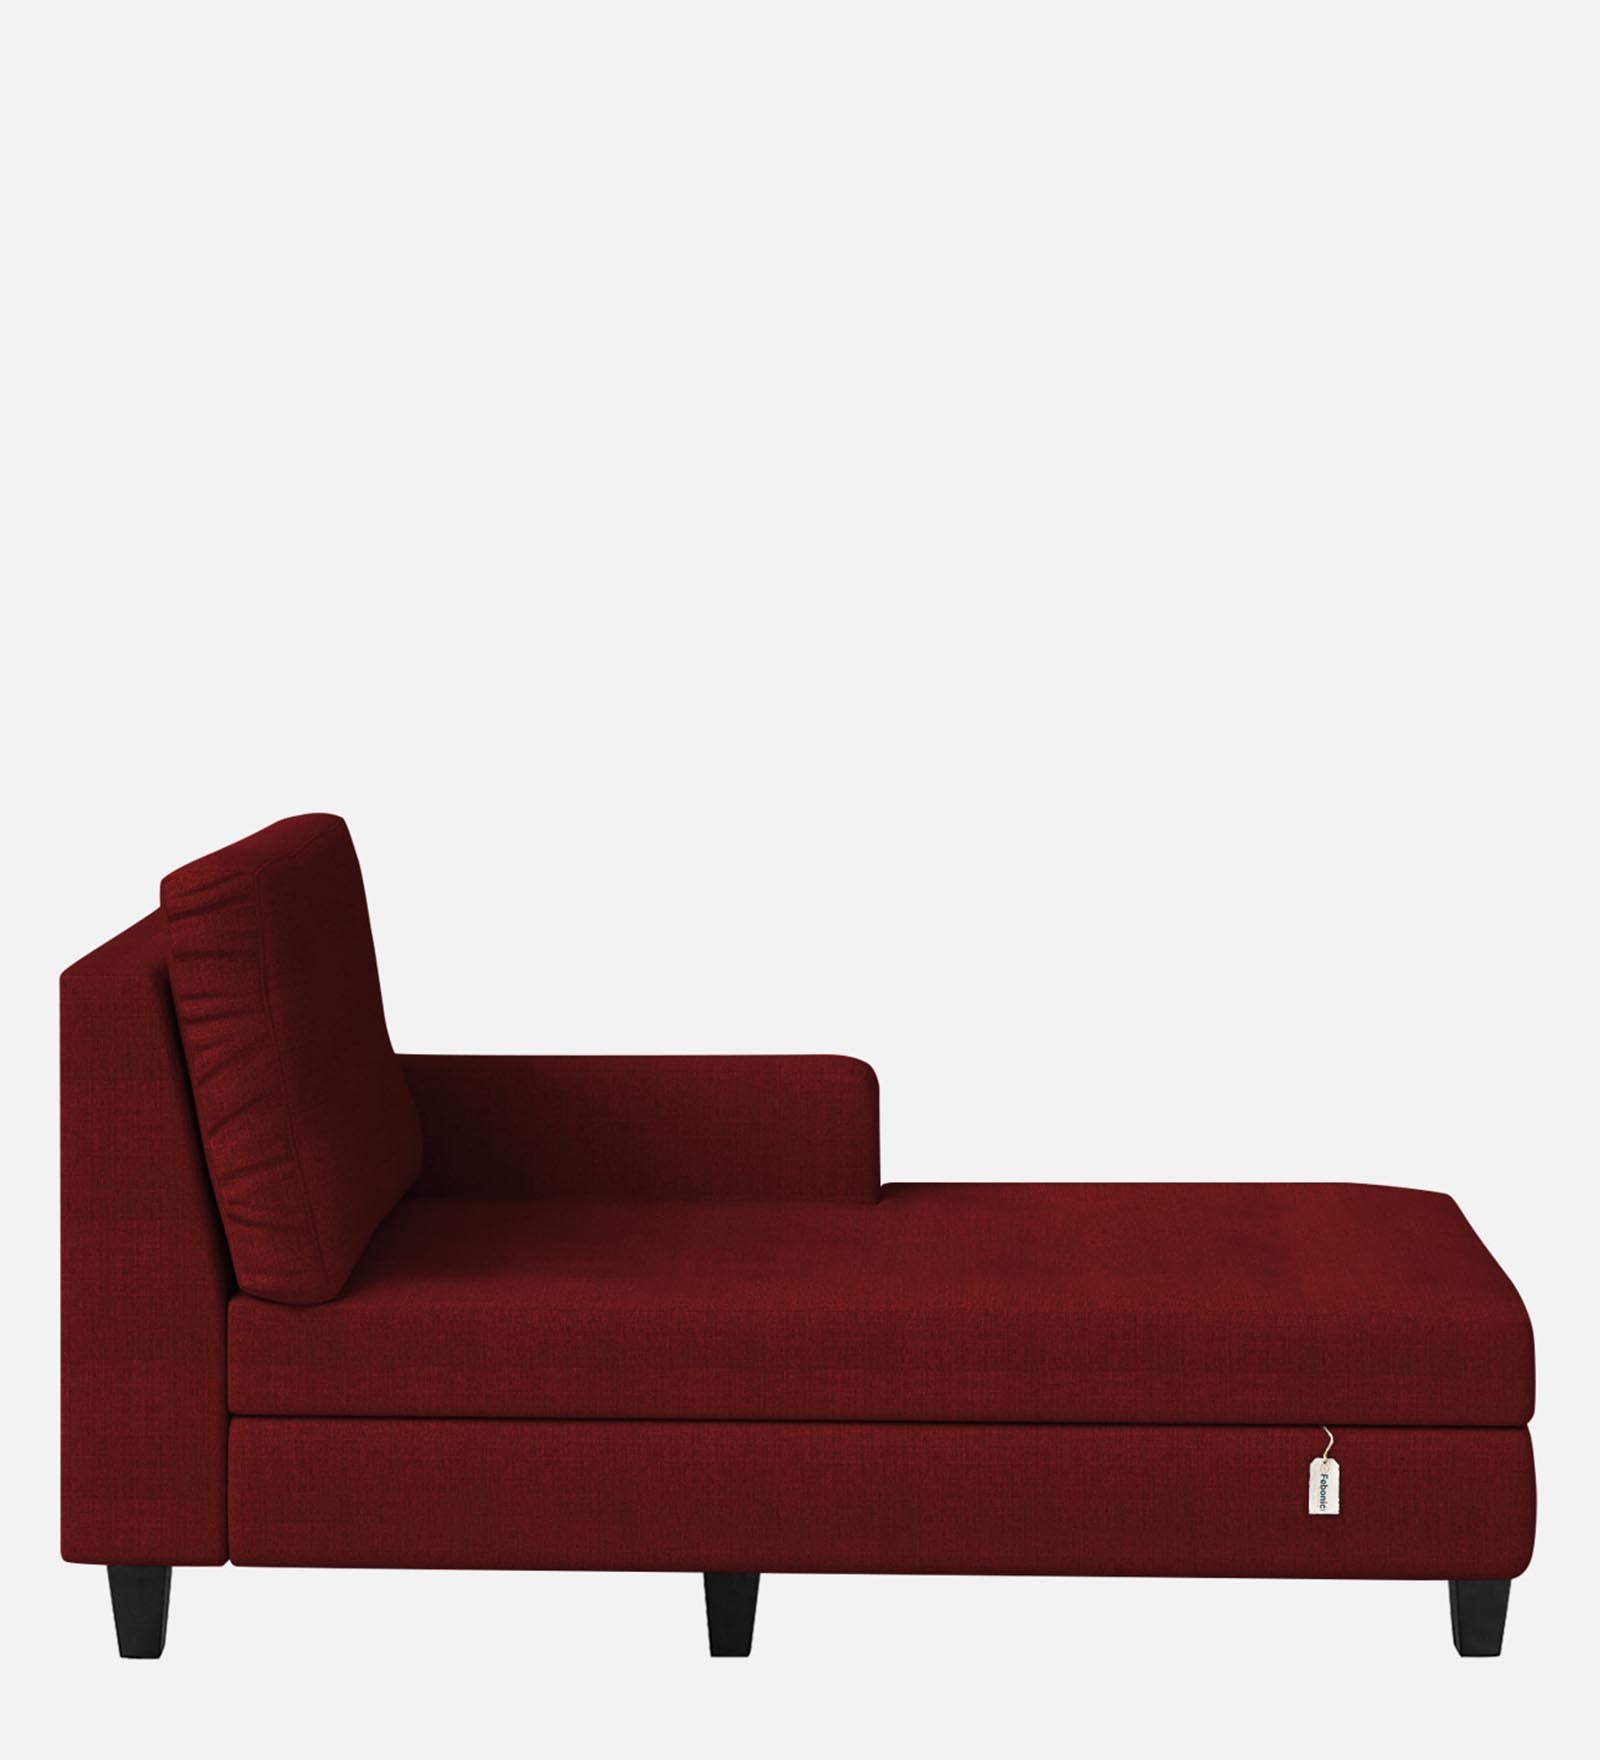 Royee Fabric RHS Chaise Lounger In Blood Maroon Colour With Storage